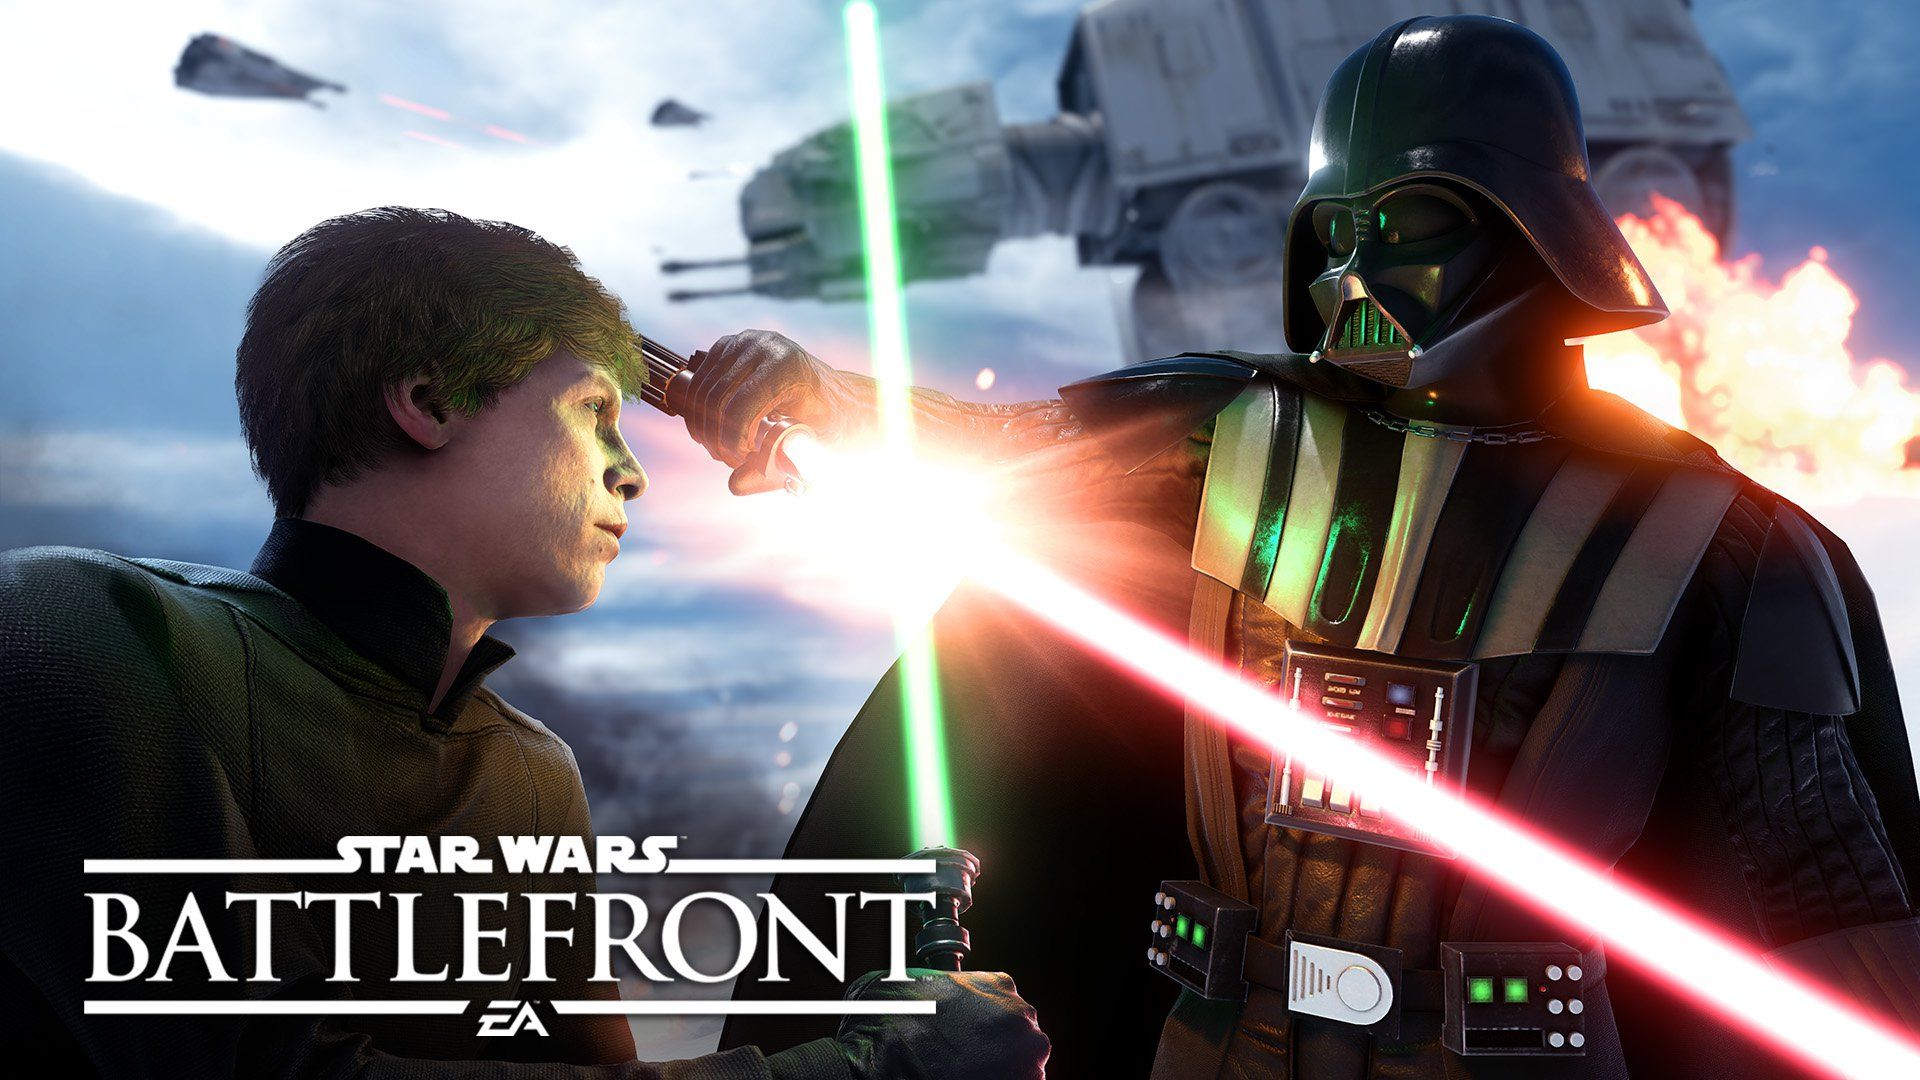 Star Wars Battlefront May Patch Detailed & Now Available, Contains Lots of Fixes & Tweaks